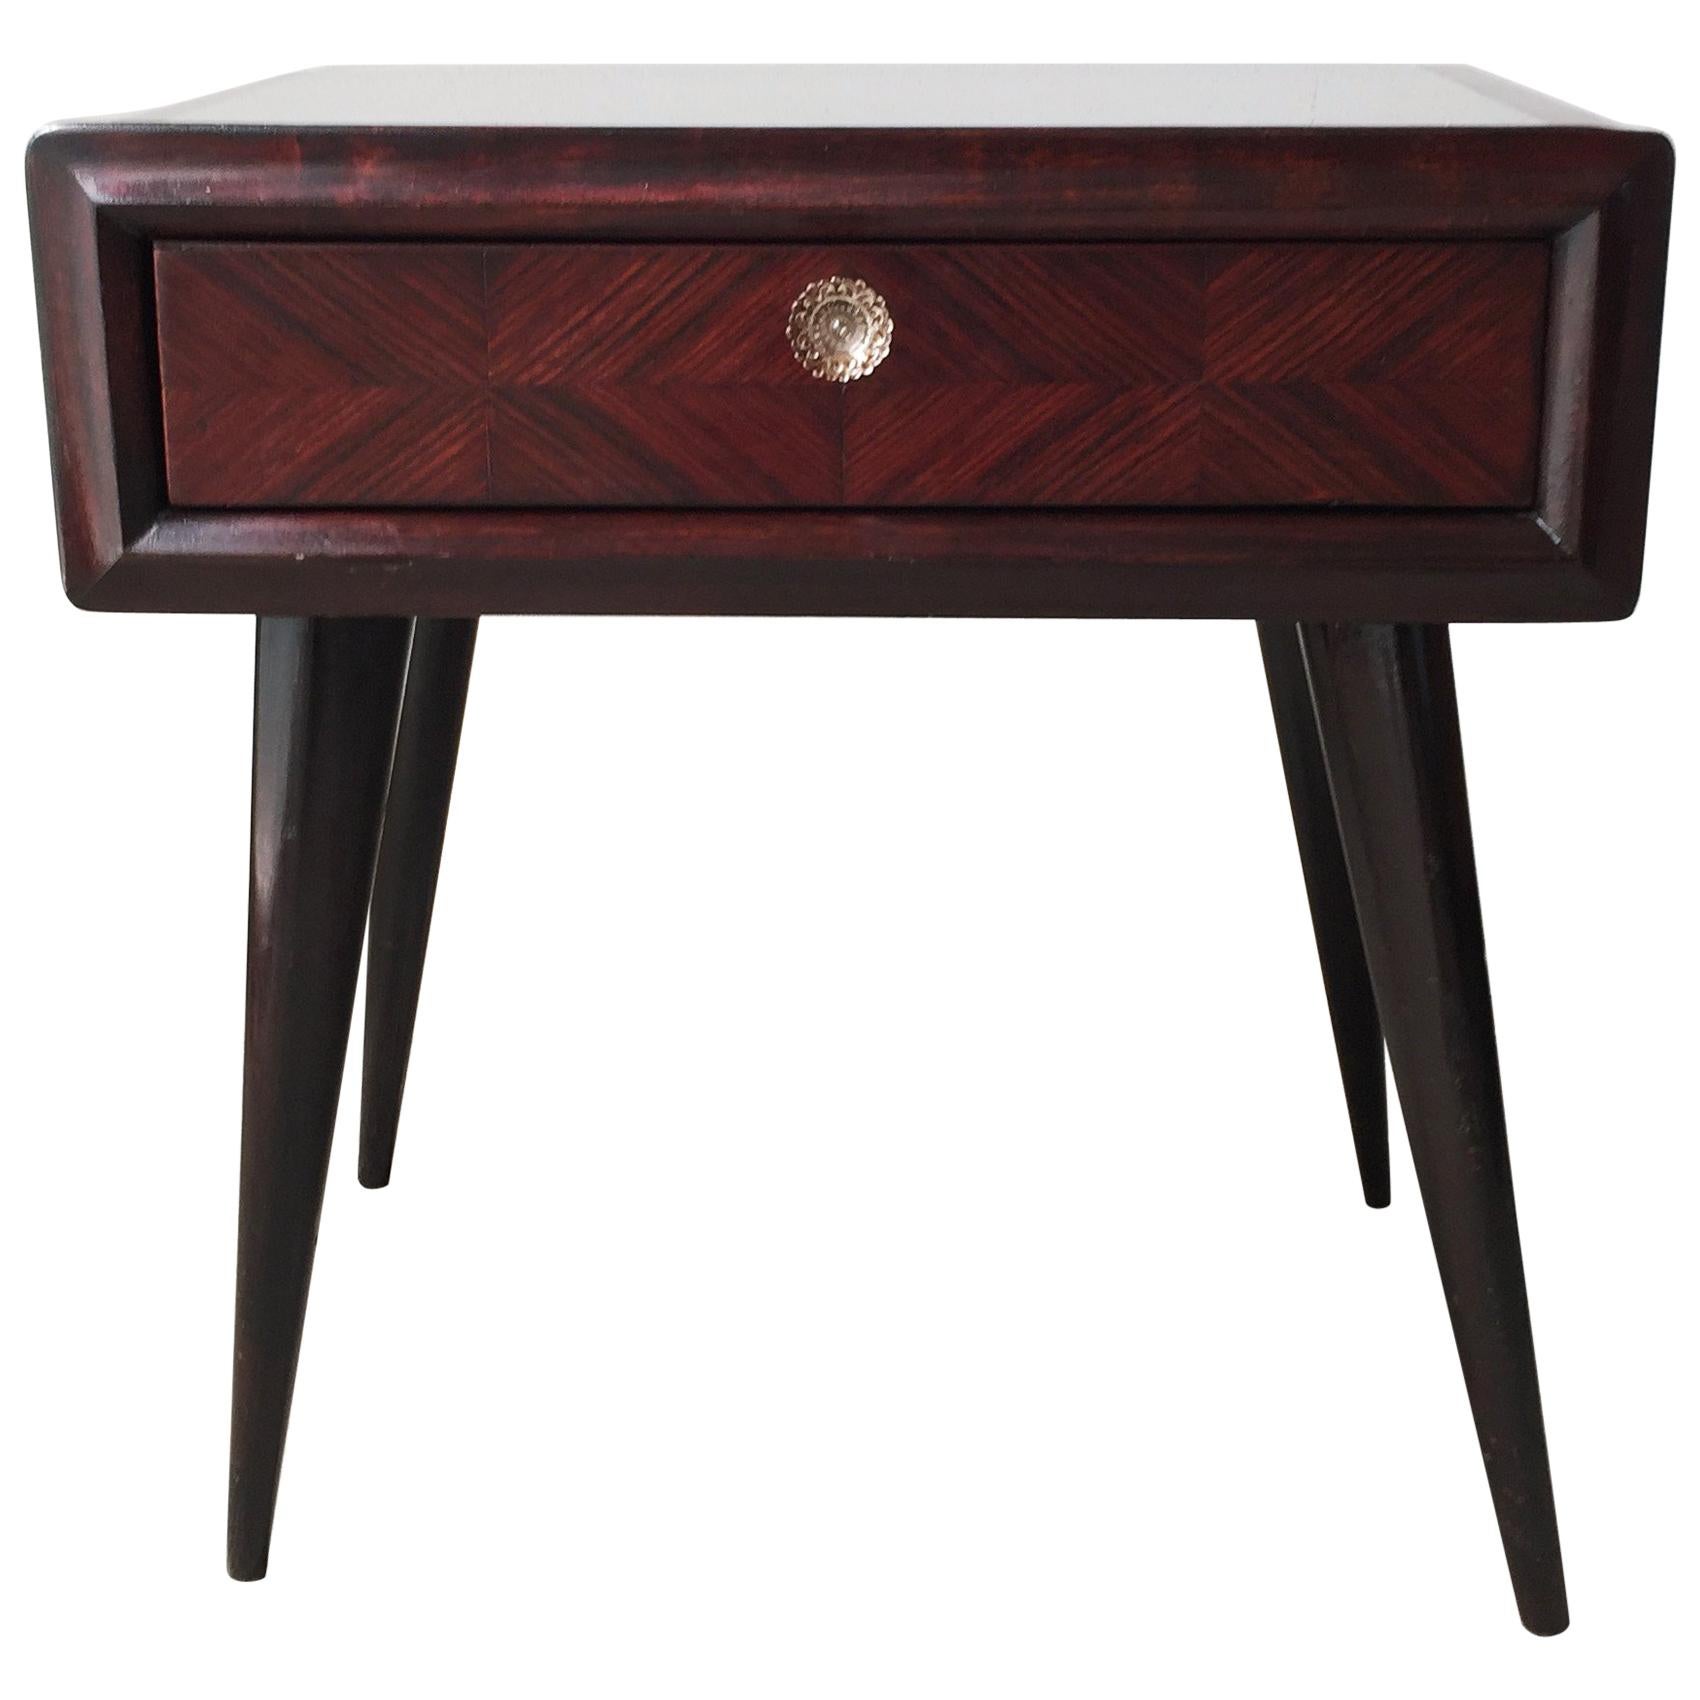 Scandinavian Nightstand in Mahogany Wood & Clear Glass on Top with drawer, 1950 For Sale